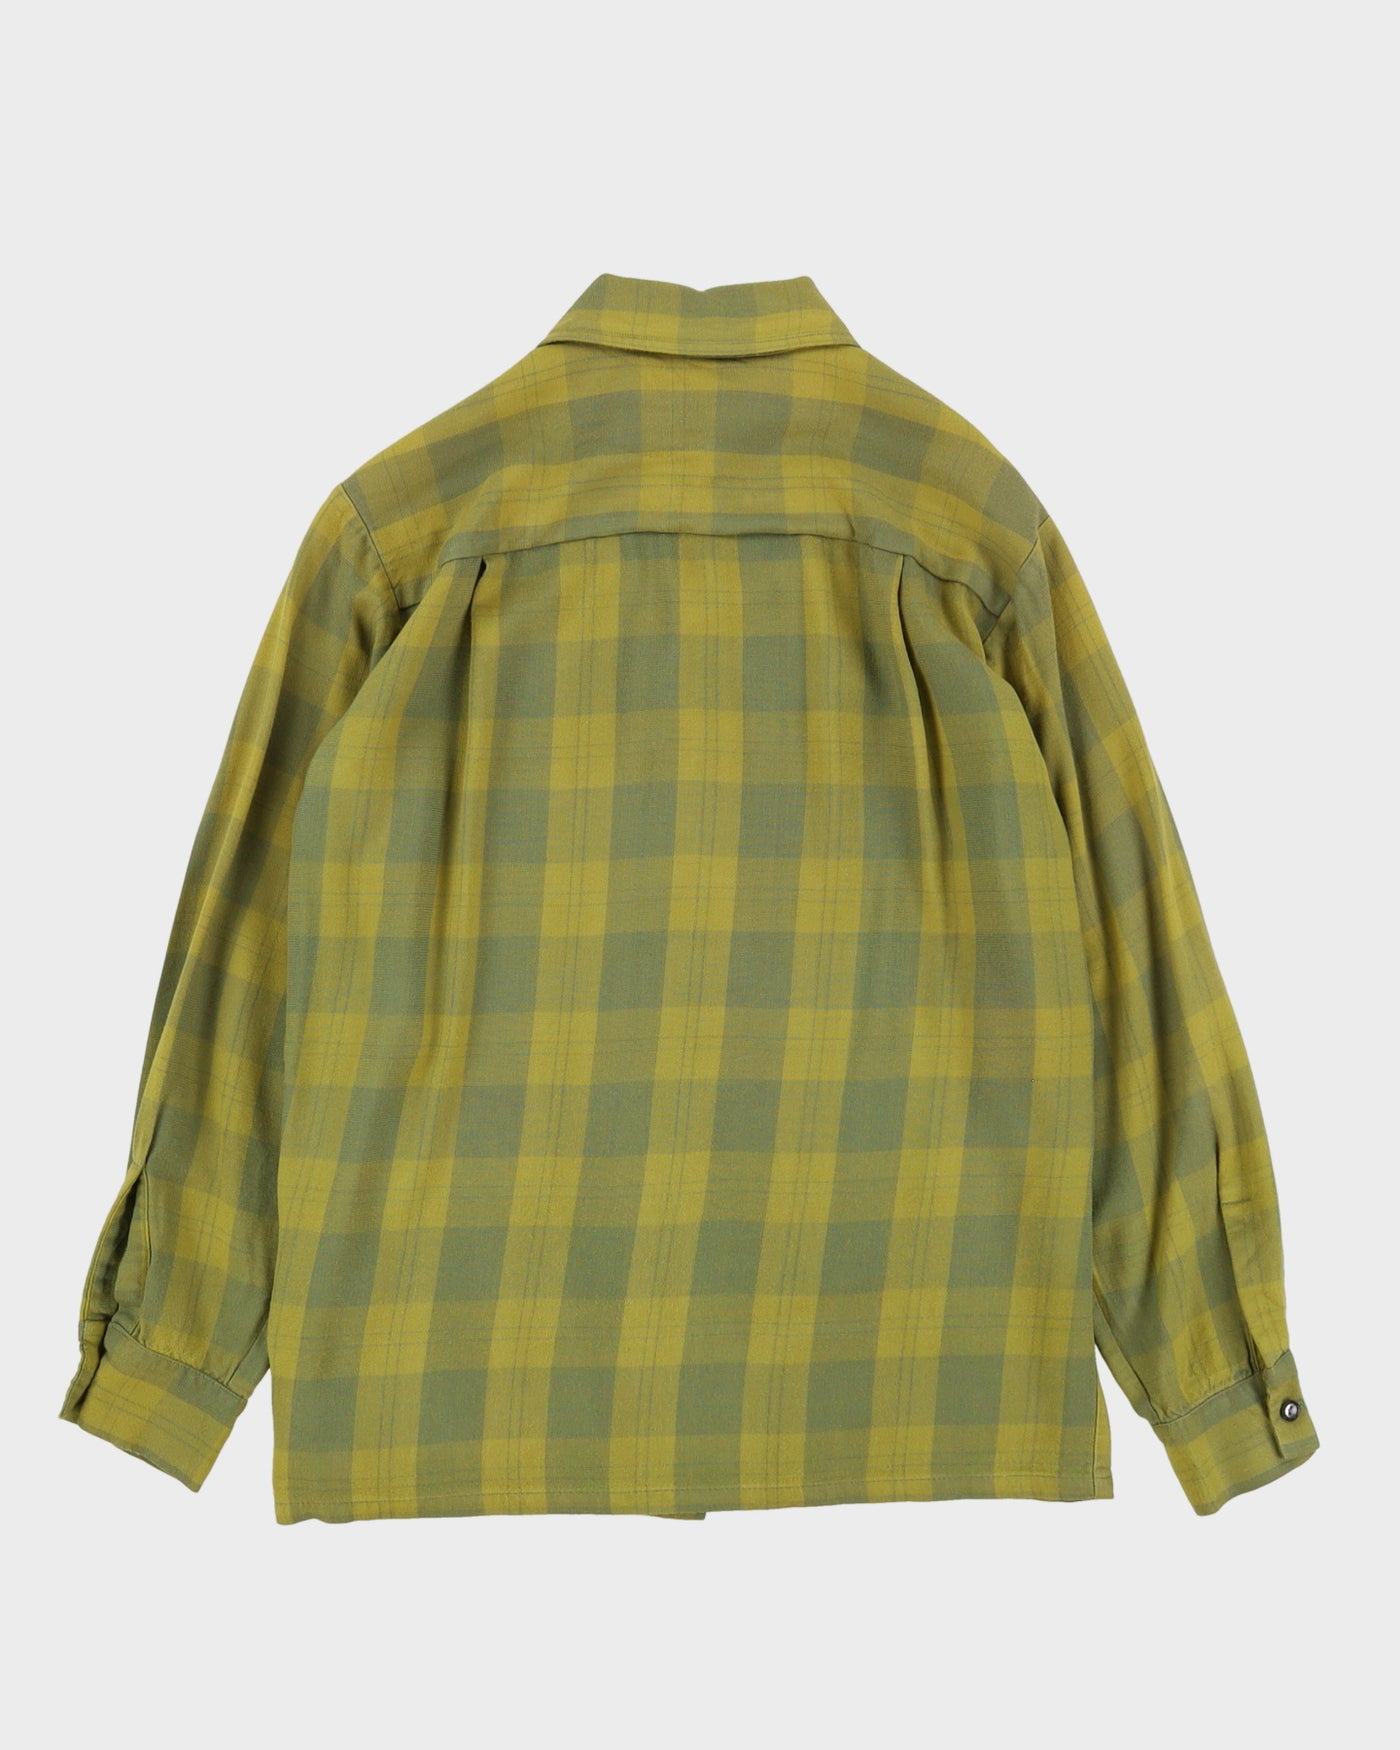 1950s Green Checked Long Sleeve Shirt - S